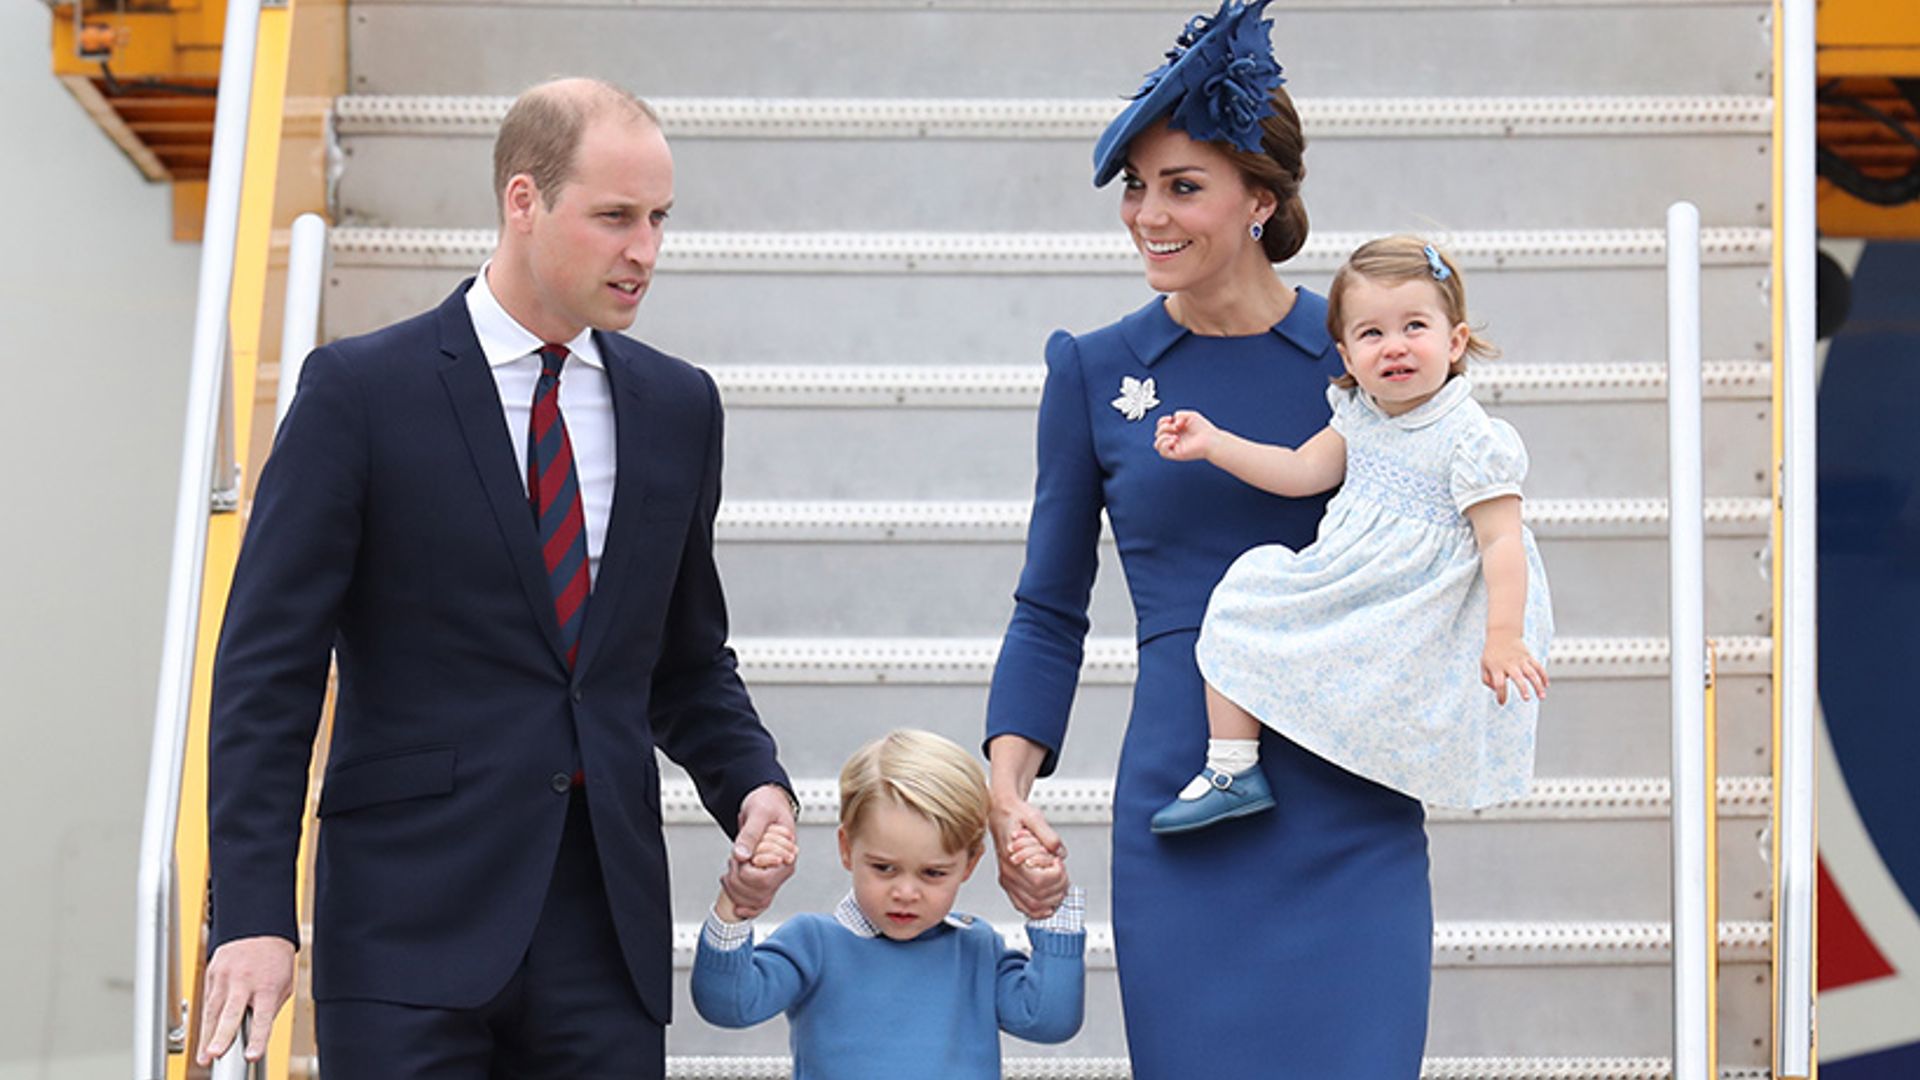 William and Kate pictured with children George and Charlotte in candid new family photo